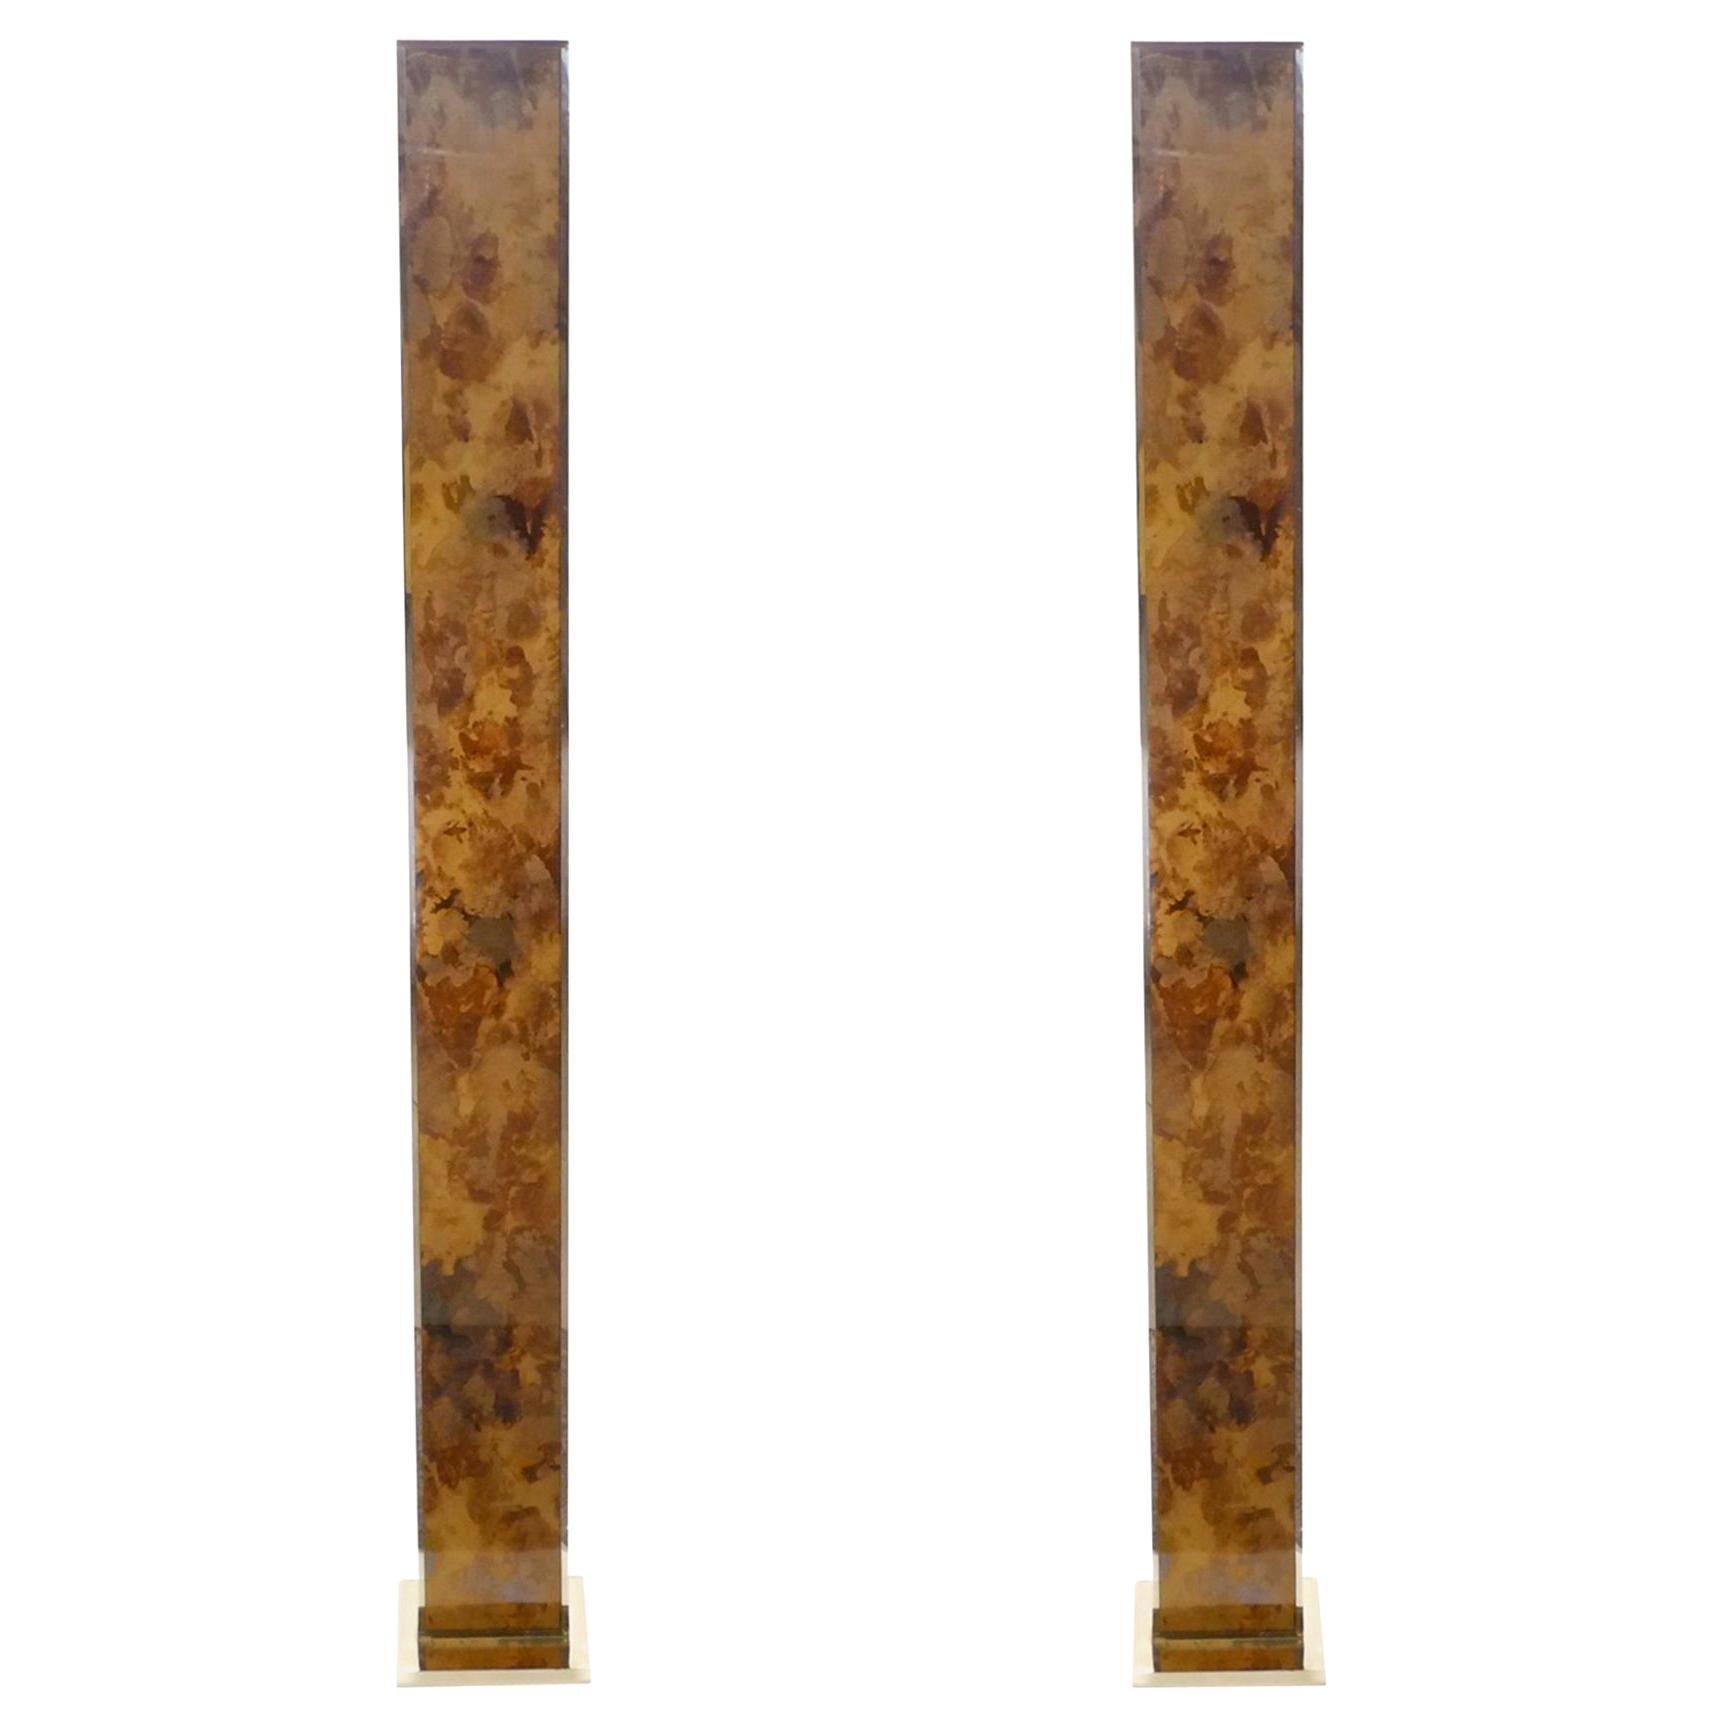 Pair of French Mid-Century Modern Brass Floor Lamps, 1970s